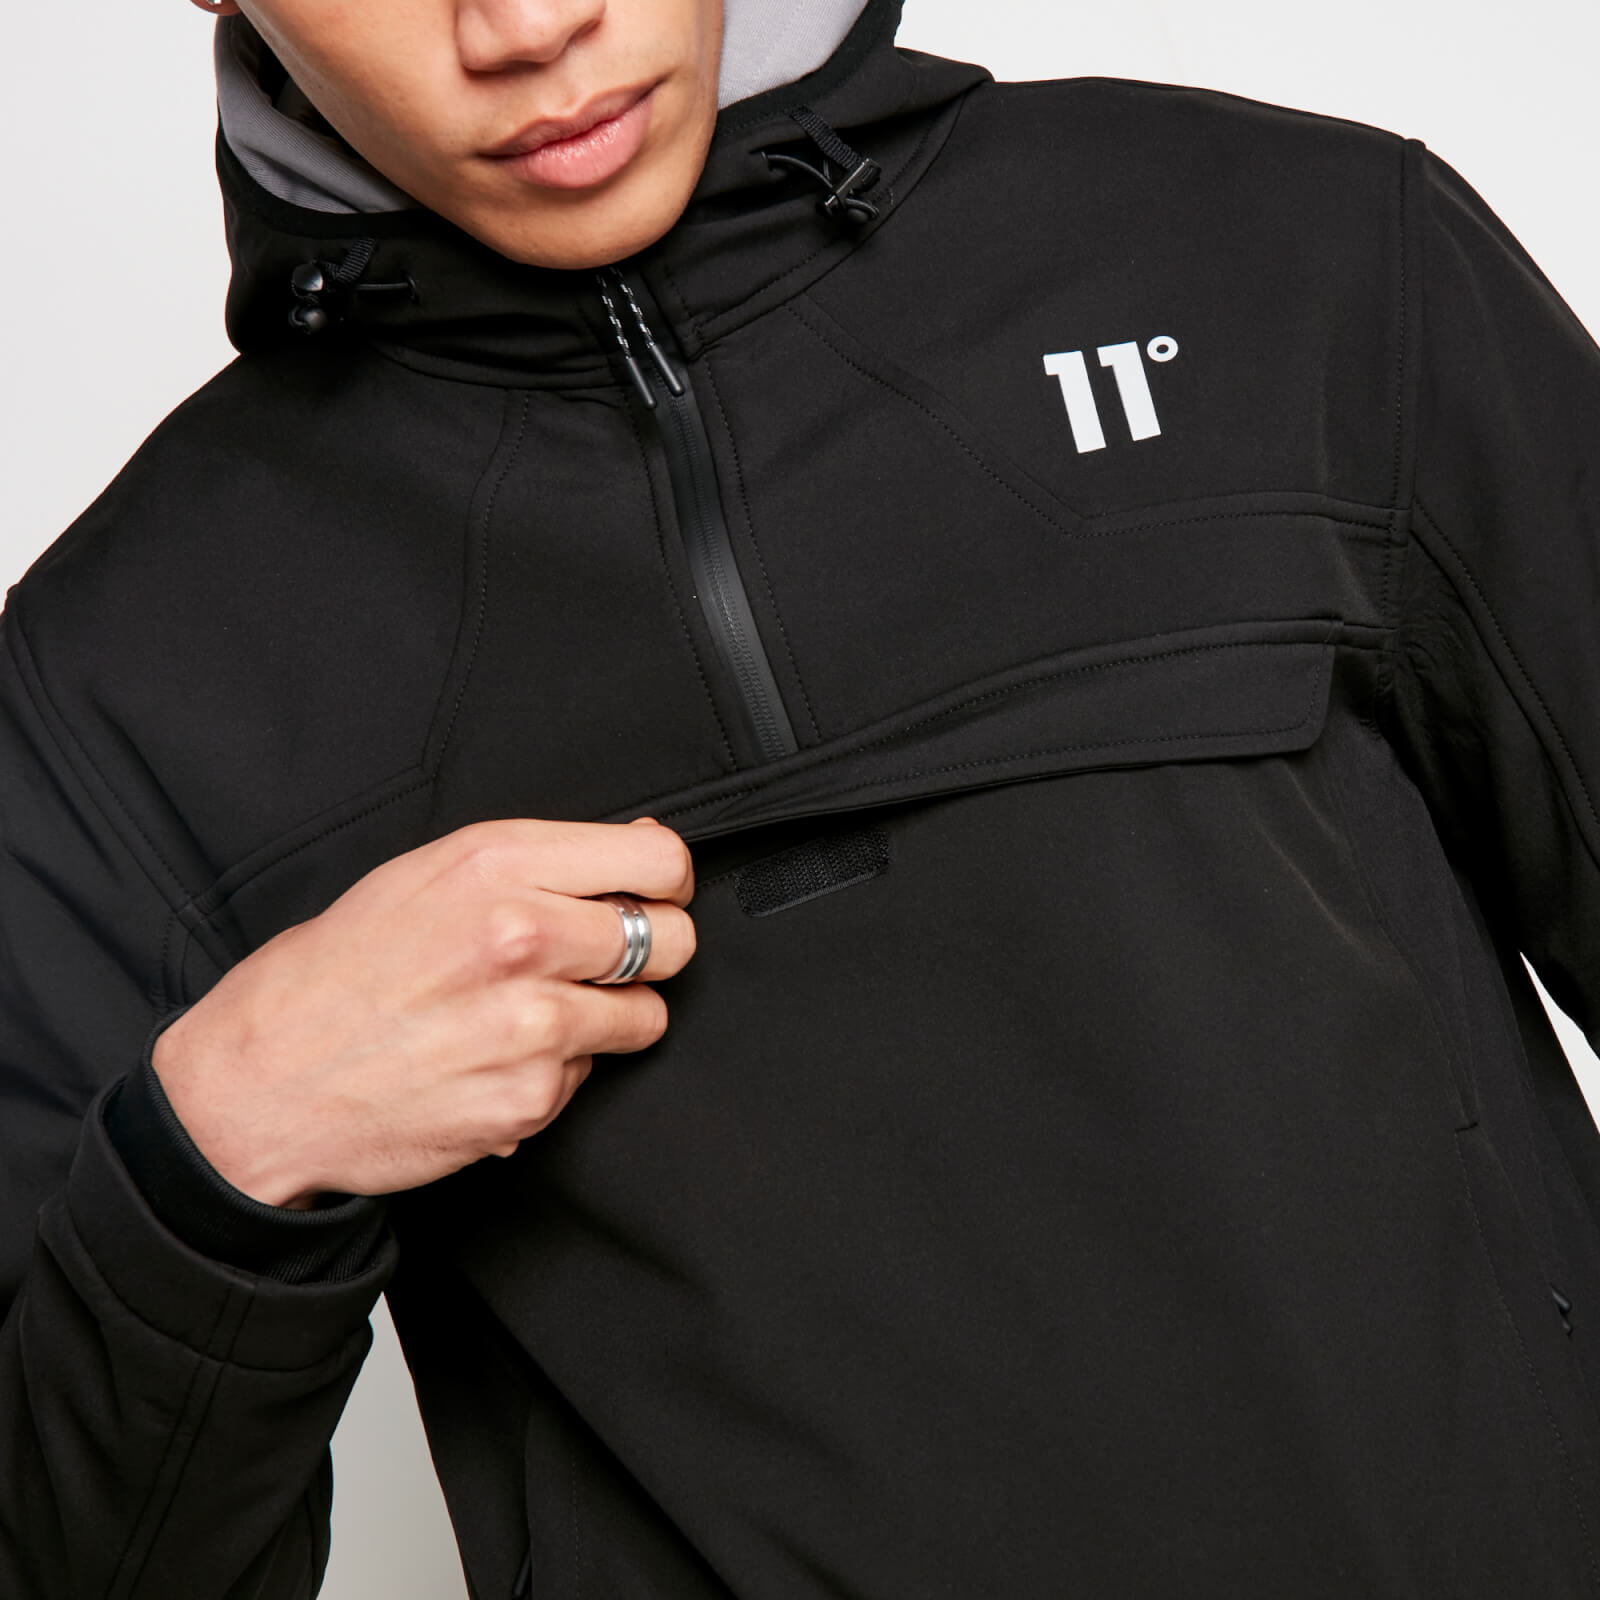 Men's Soft Shell Over The Head Jacket - Black-Front Pocket View